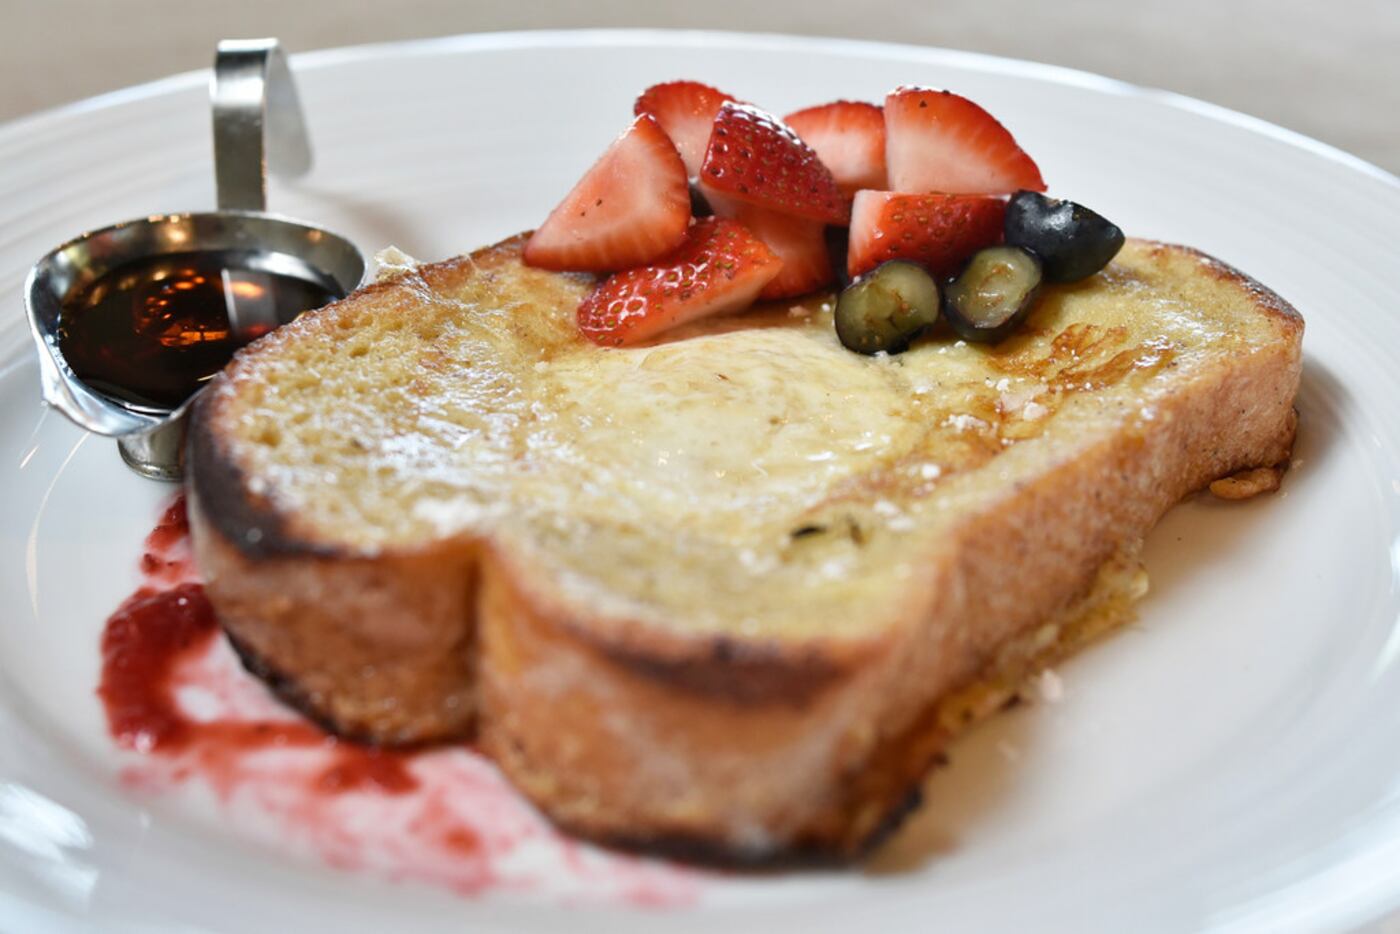 French toast "Toad in the Hole" from Ellie's restaurant, prepared at a test kitchen in west...